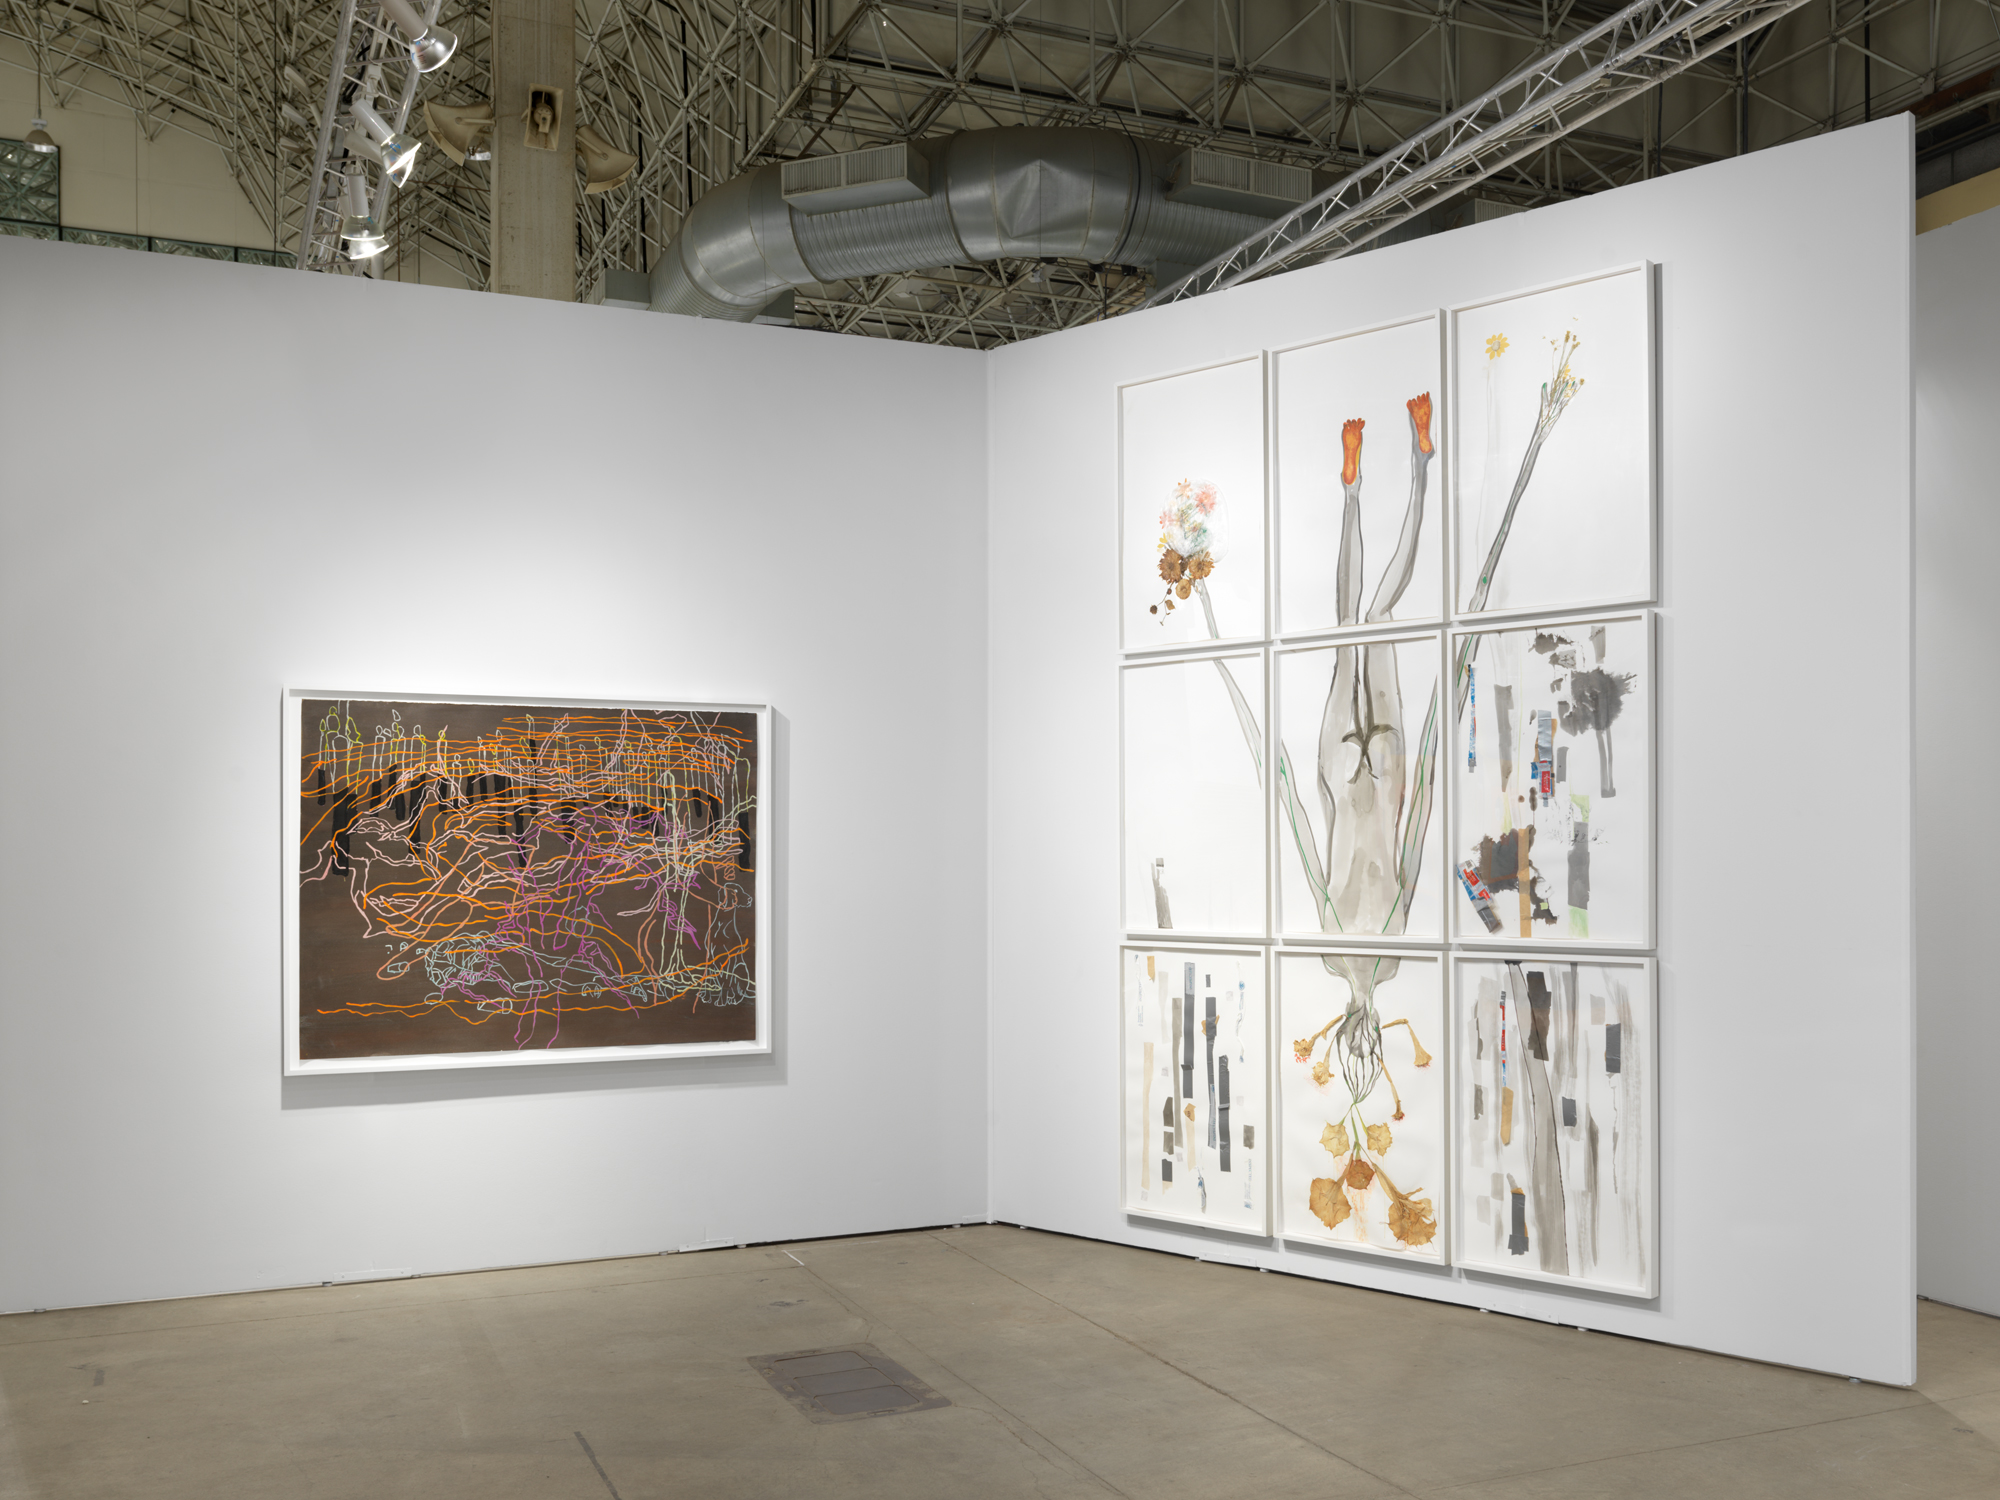  Image: EXPO CHICAGO 2019, installation view, Gallery Wendi Norris, Booth 315, Navy Pier, 600 E Grand Ave, Chicago, IL, September 19 - 22, 2019. Photo: Dan Bradica. 